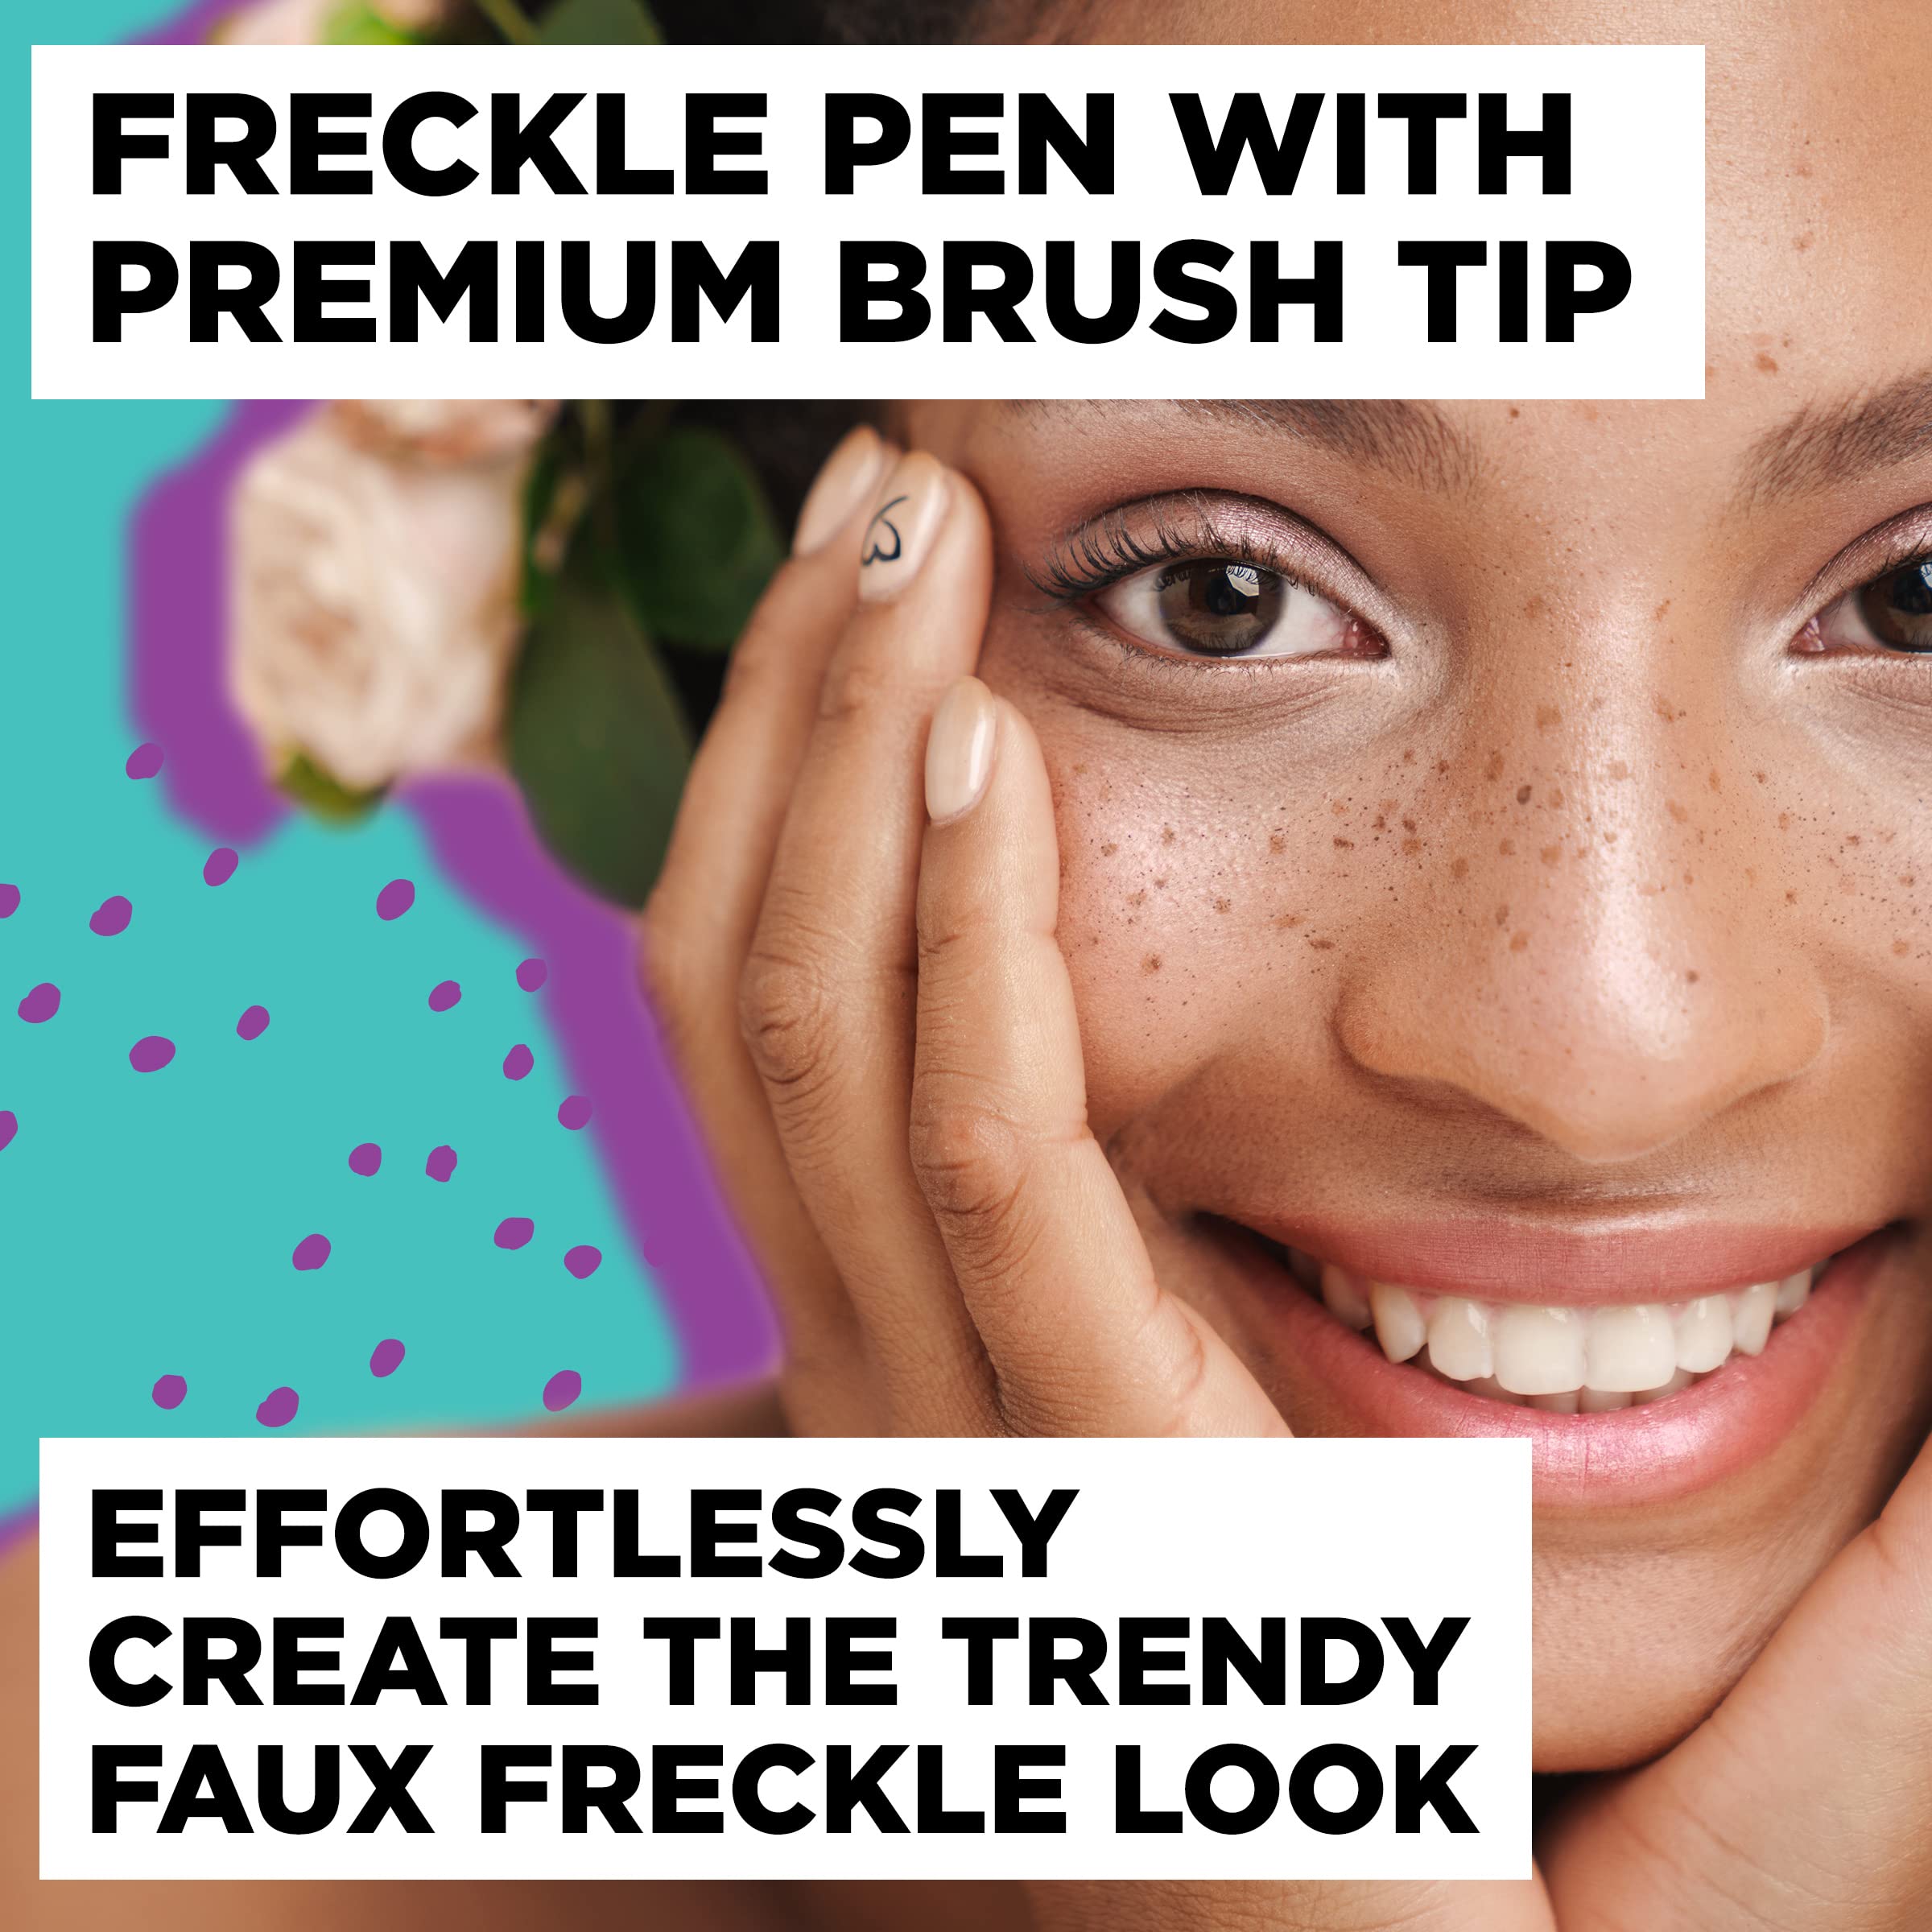 BodyMark Freckle Pen, Soft Brush Tip, 1 Count Pen in Dark Brown Freckle, Cosmetic Quality Freckle Pen for Skin